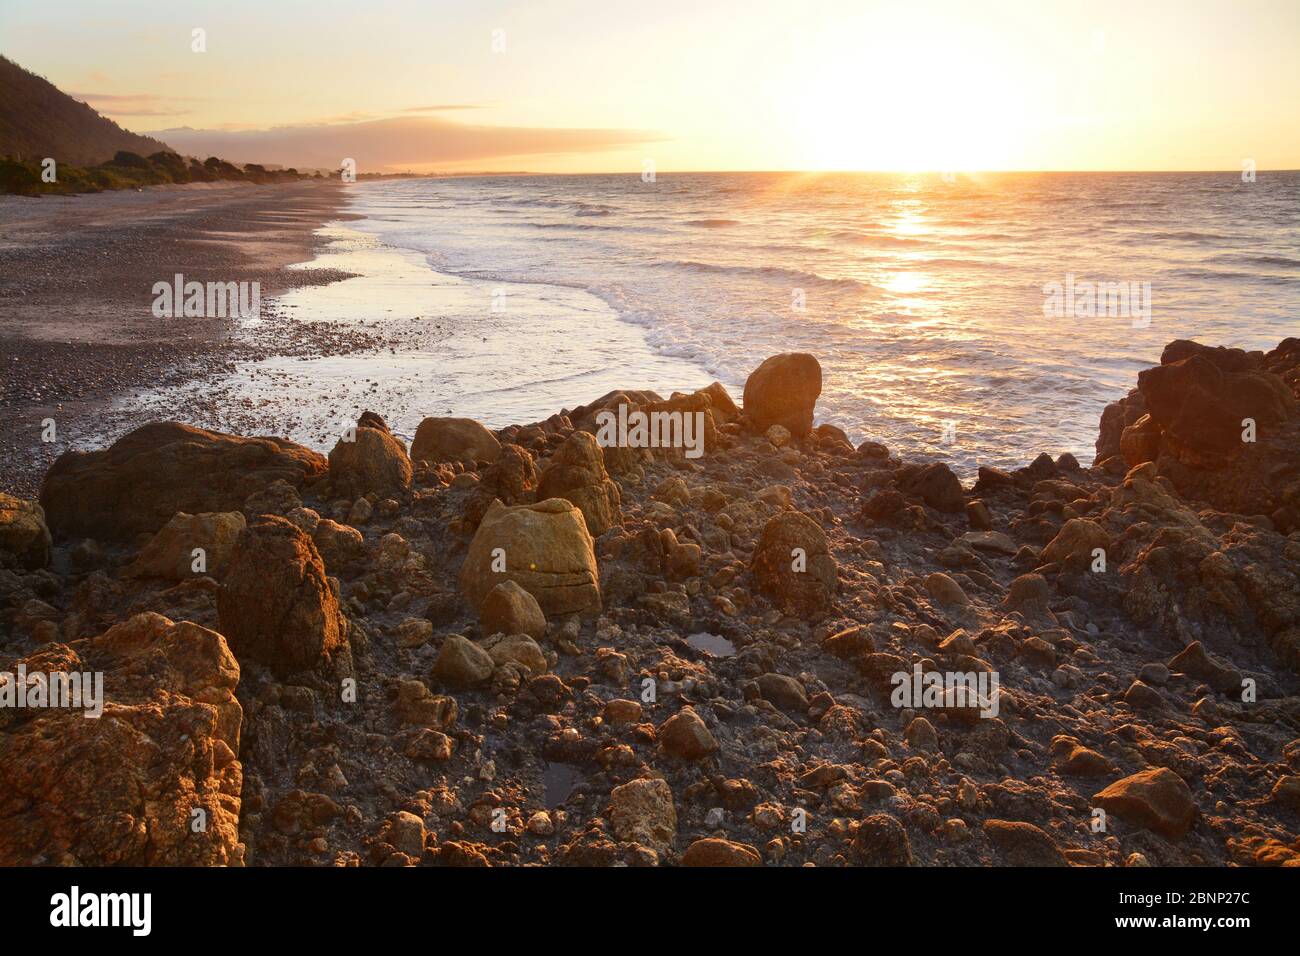 Sunset time with warm colors at the beach in Granity, New Zealand Stock Photo